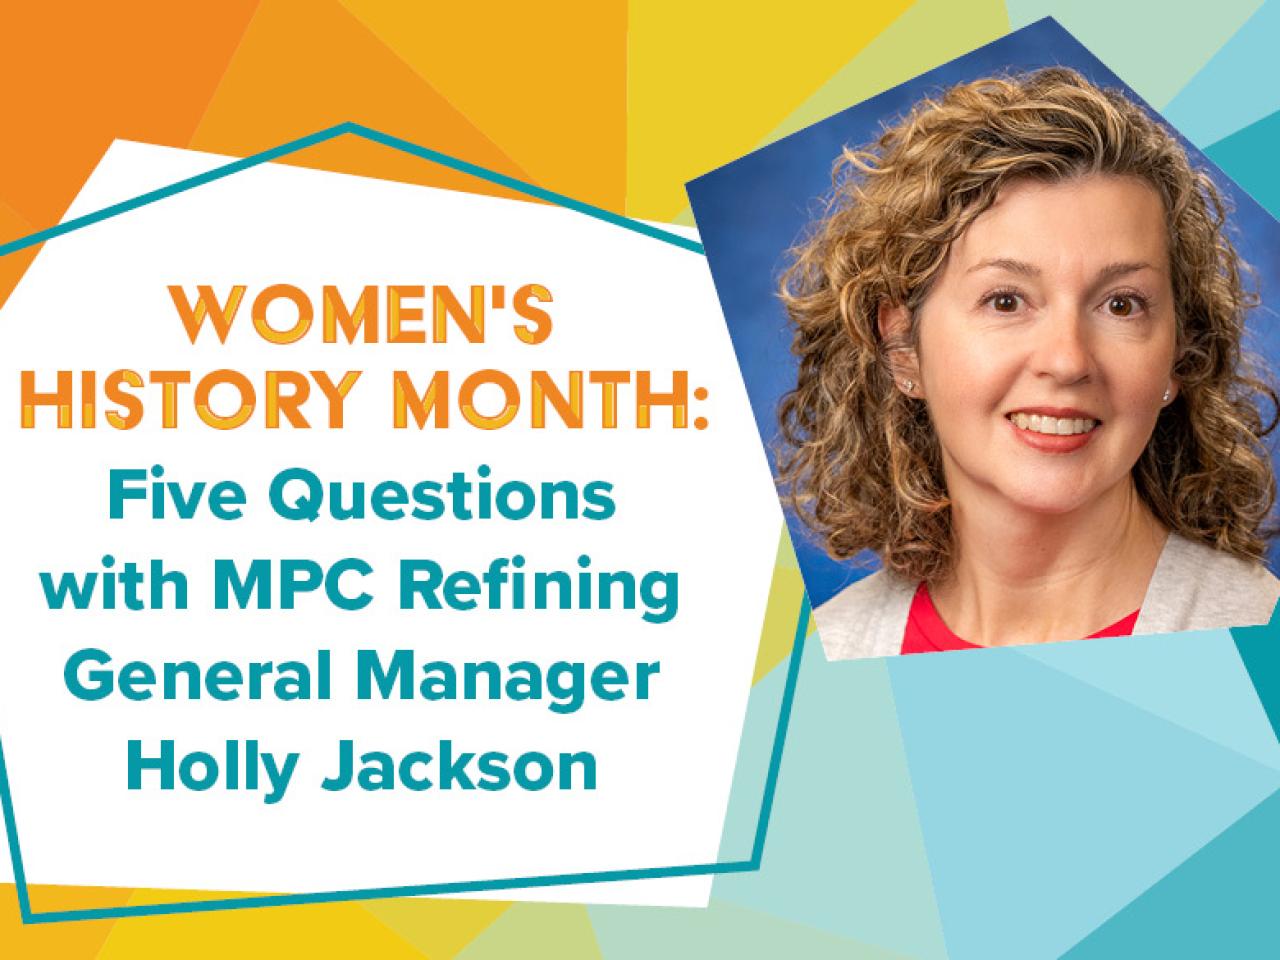 Women's History Month: Five Questions with MPC Refining General Manager Holly Jackson